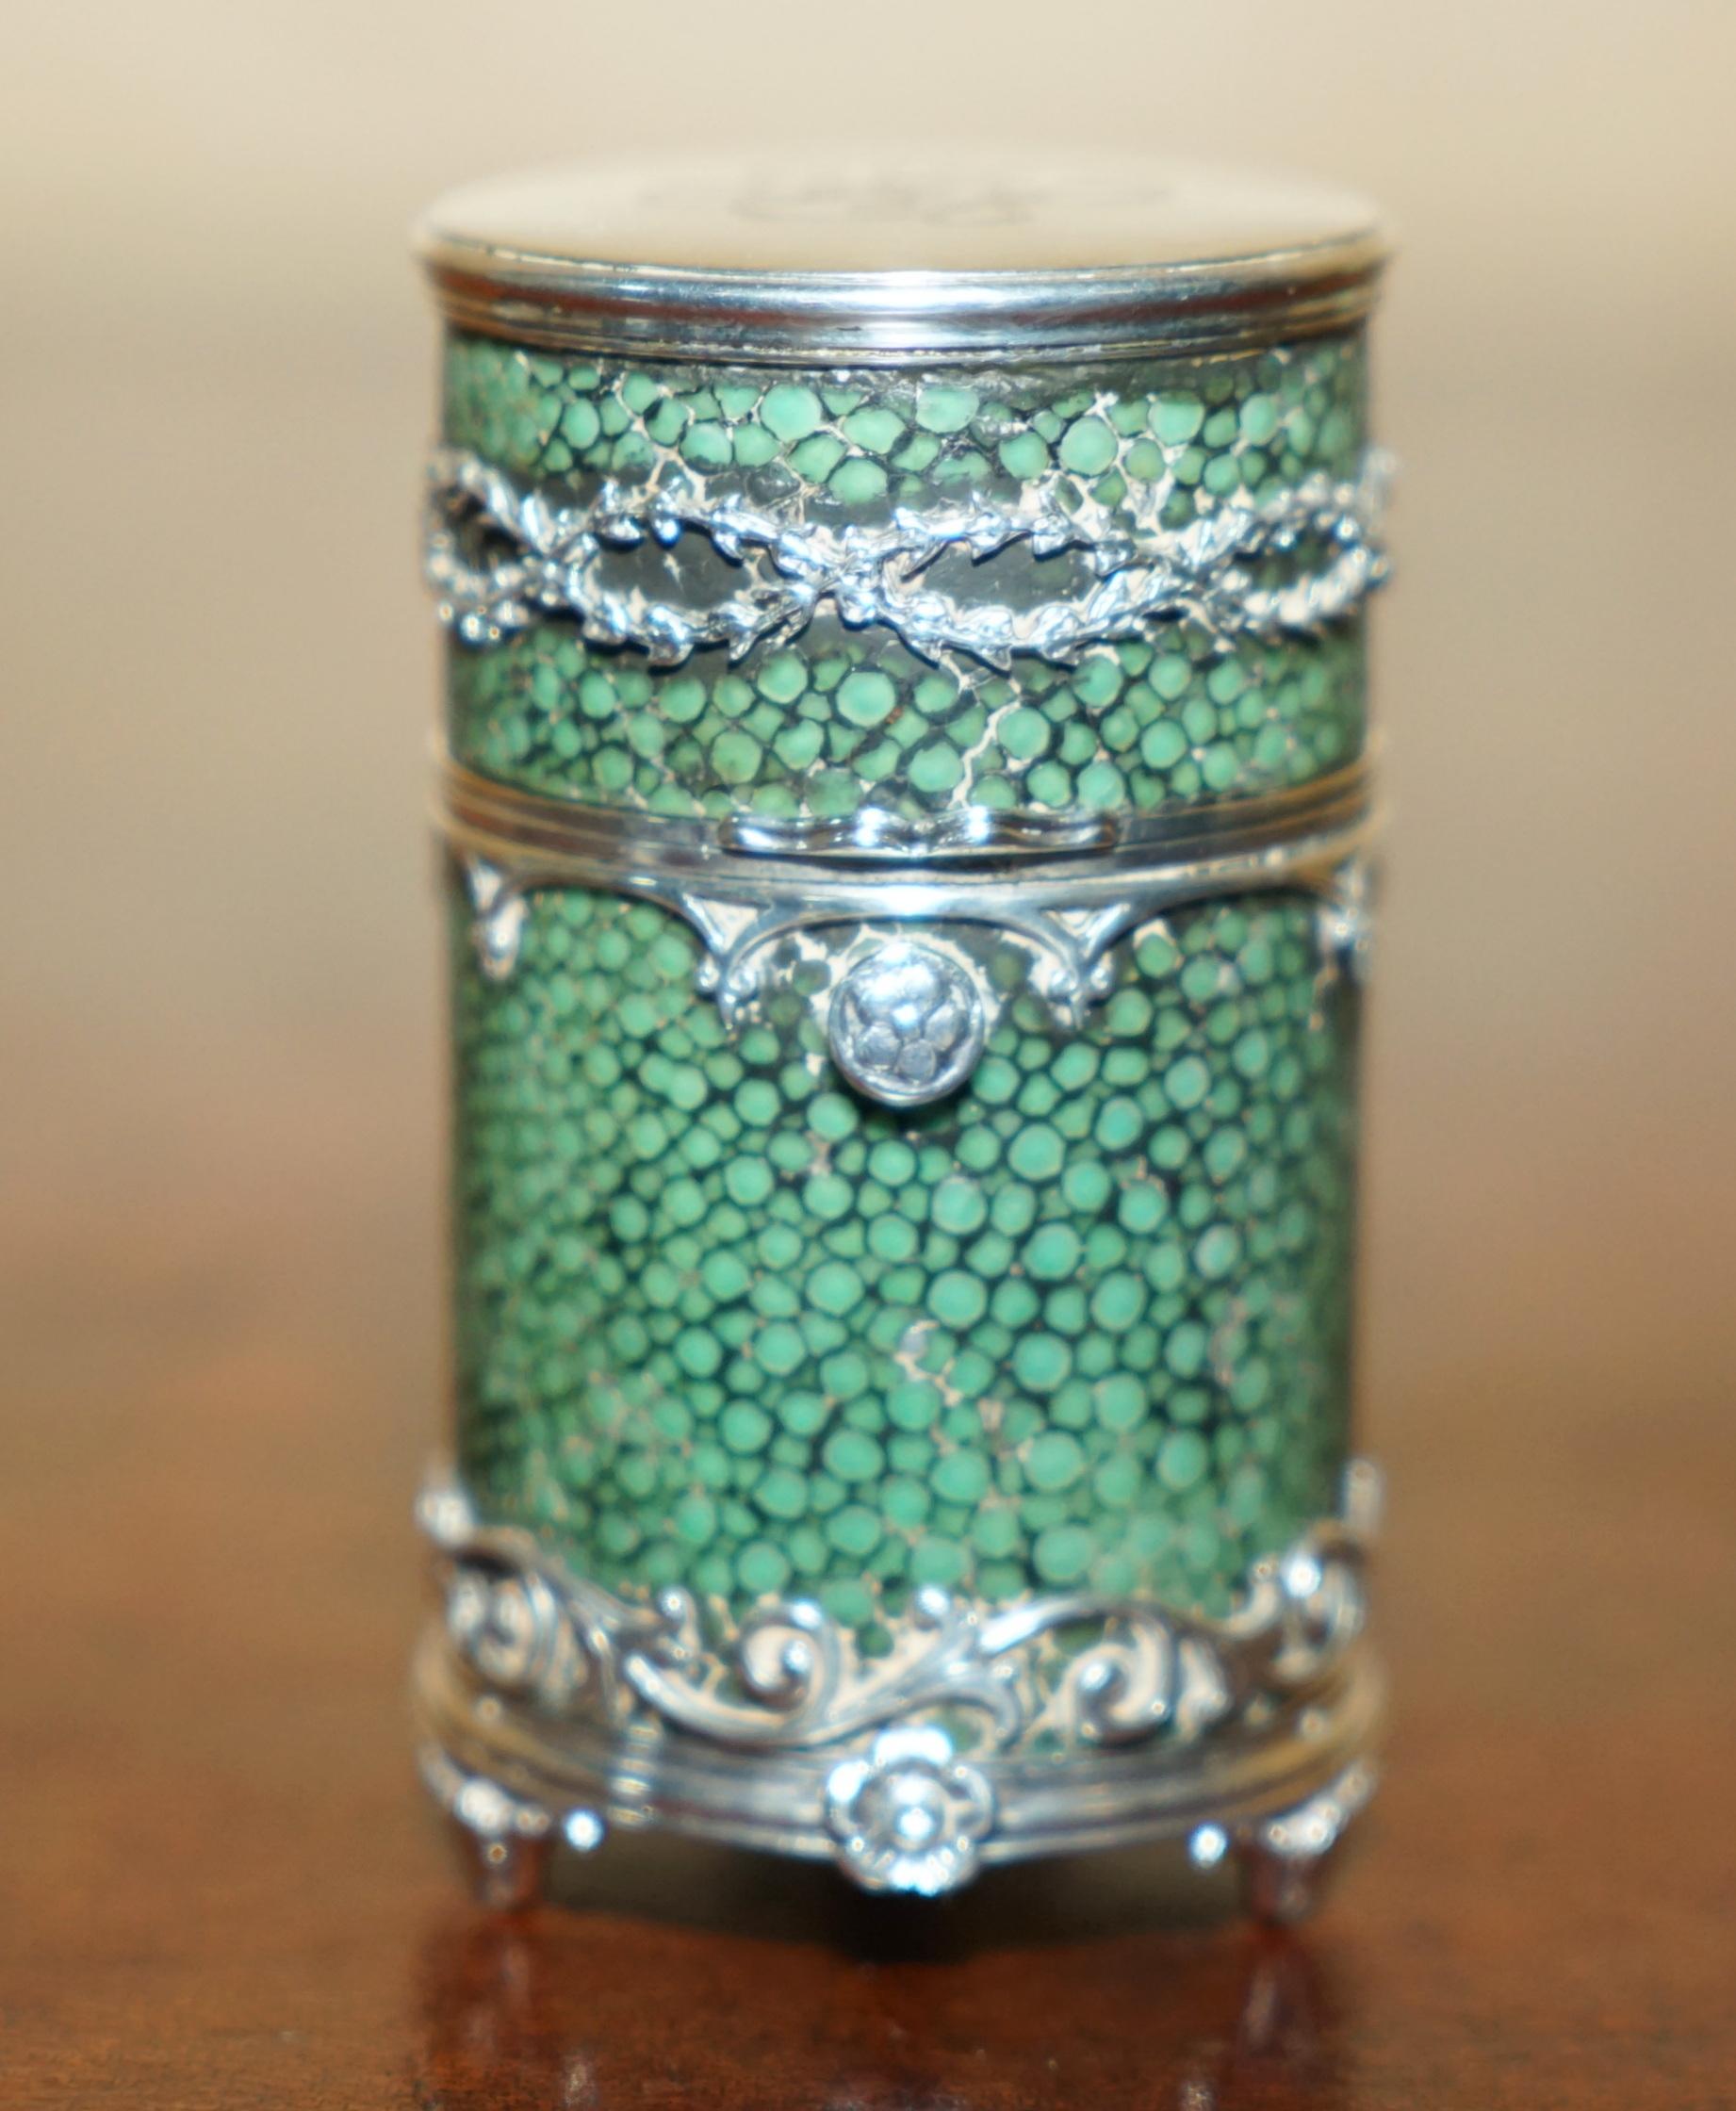 Royal House Antiques

Royal House Antiques is delighted to offer for sale this very rare and highly collectable, Watherston London Victorian Scent bottle case in silver and Shagreen

A very good looking well made and decorative piece, it is as